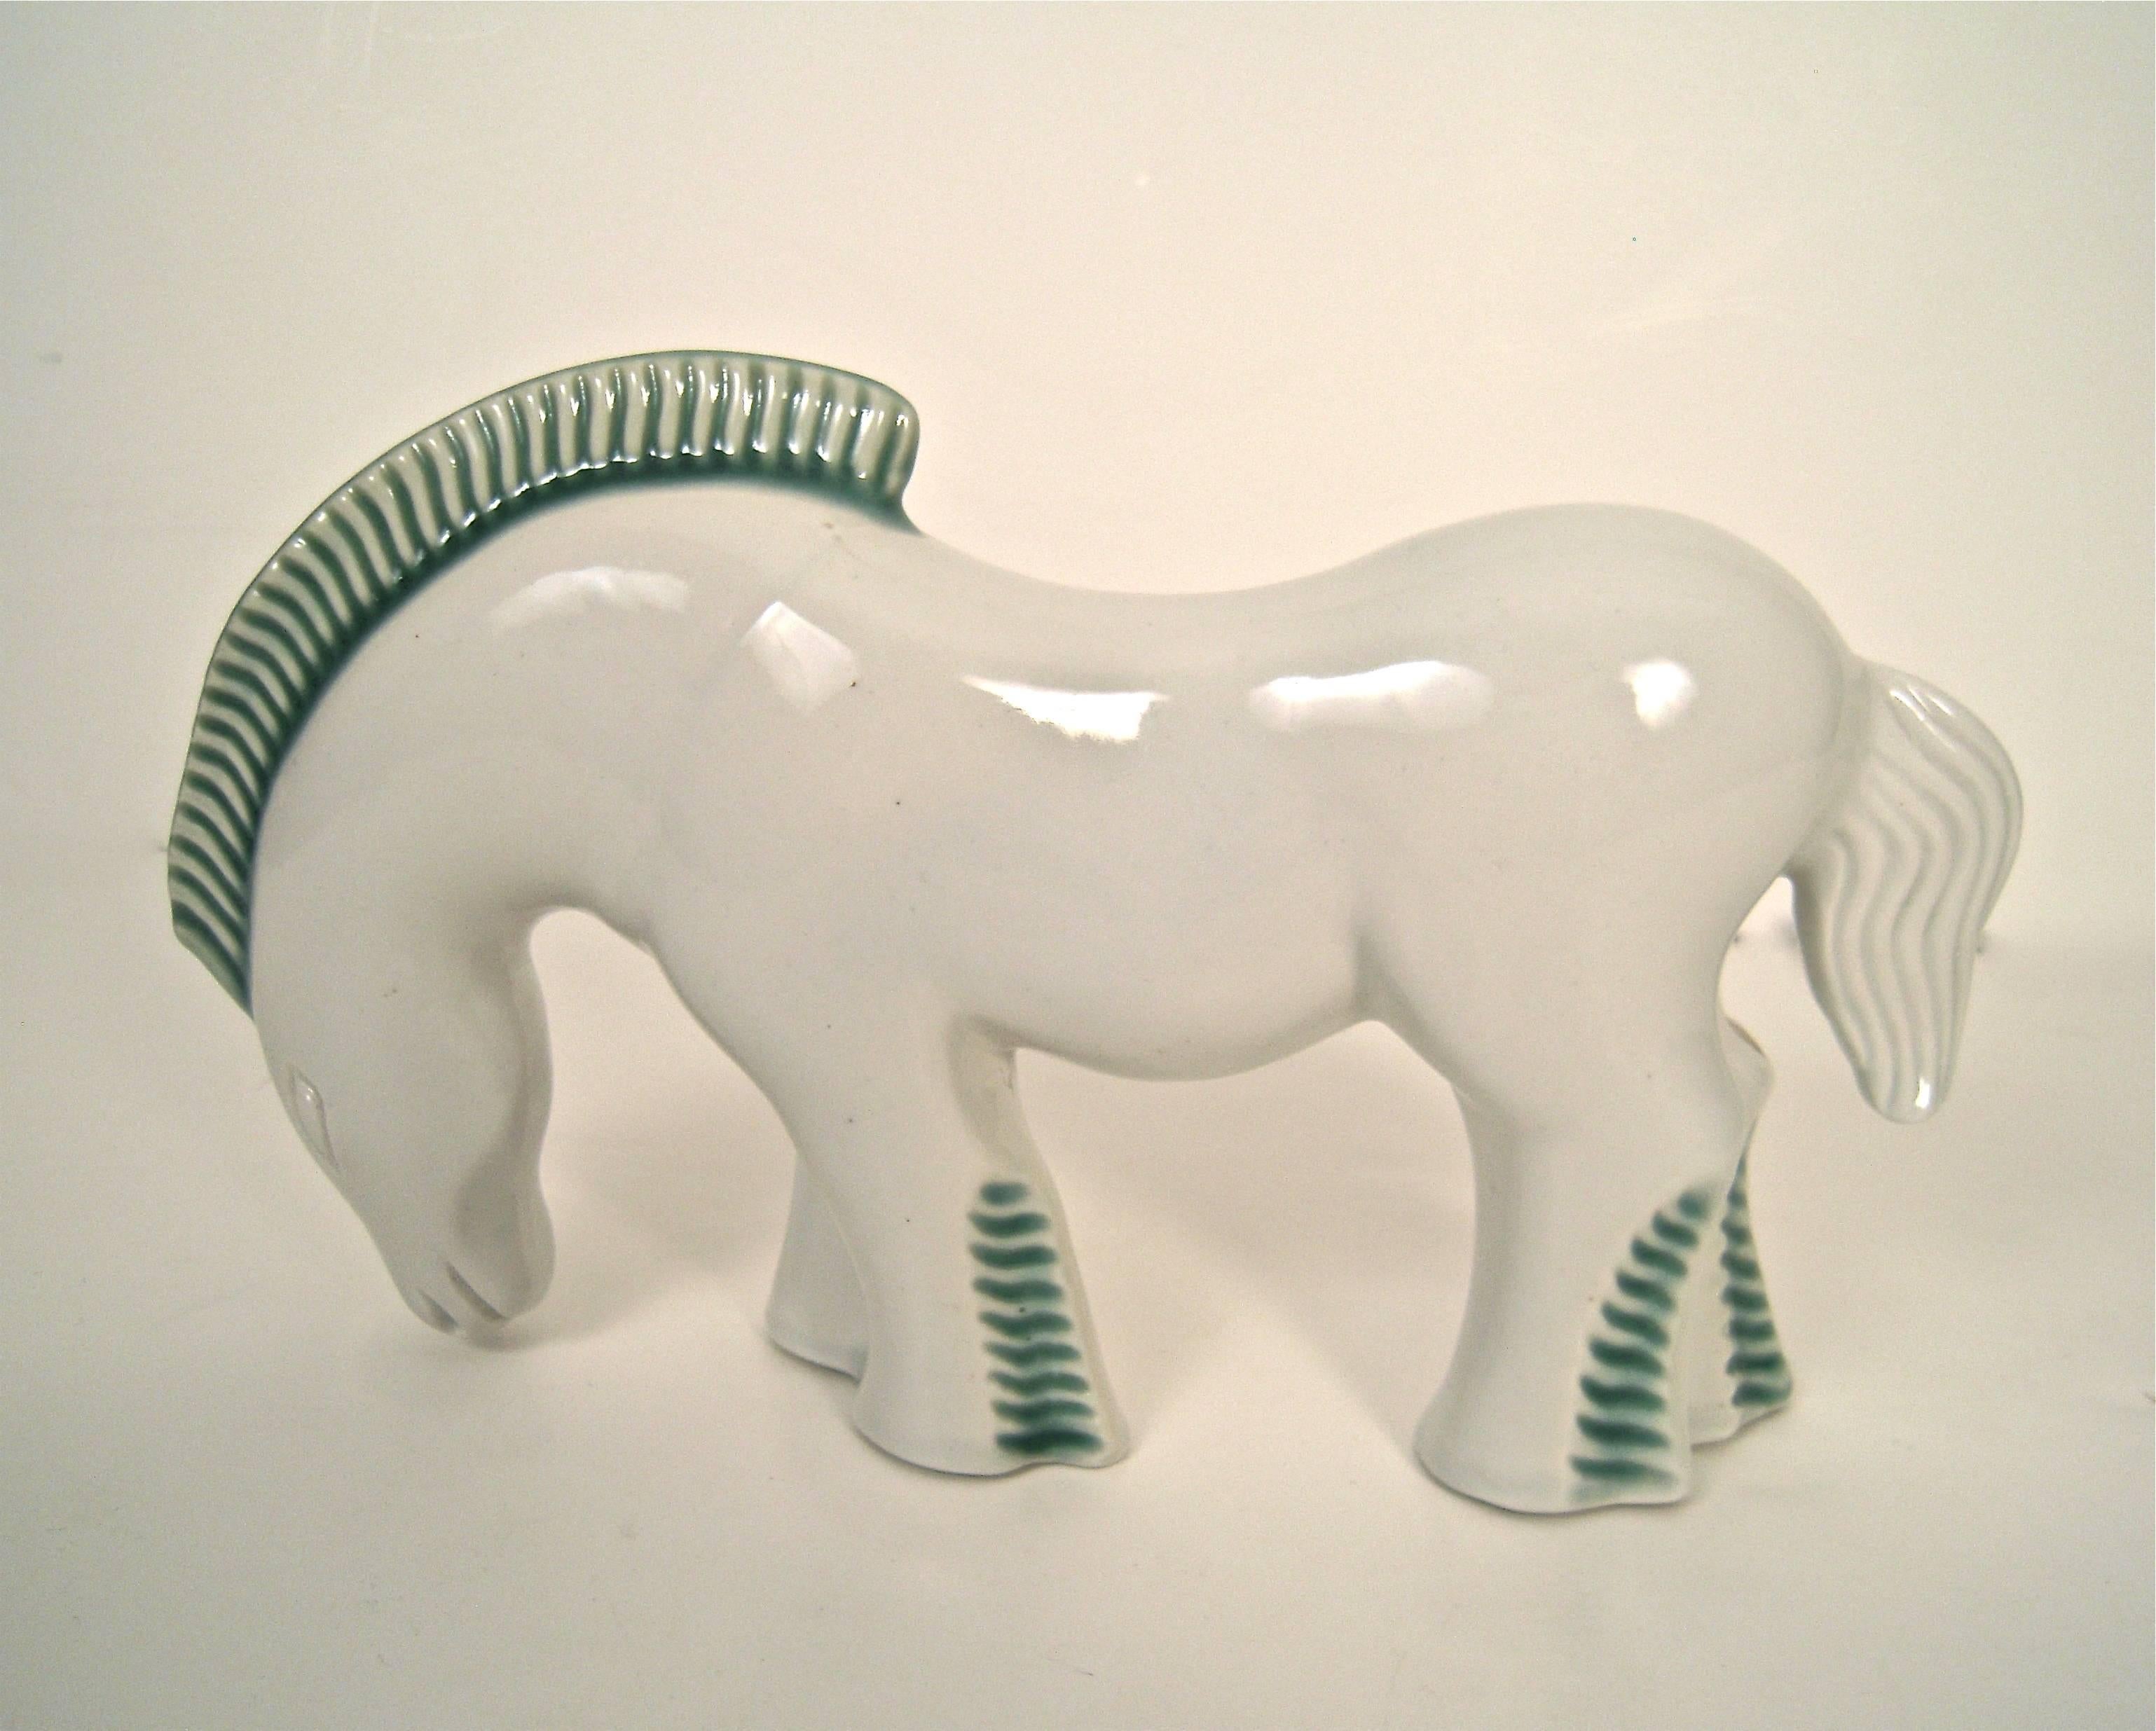 A stylish 1930s Japanese Art Deco pottery figure of a horse, made for the European and American markets, in white glazed earthenware with forest green incised main and legs. Signed with printed 'Kent Art Ware' mark on the underside of the horse's